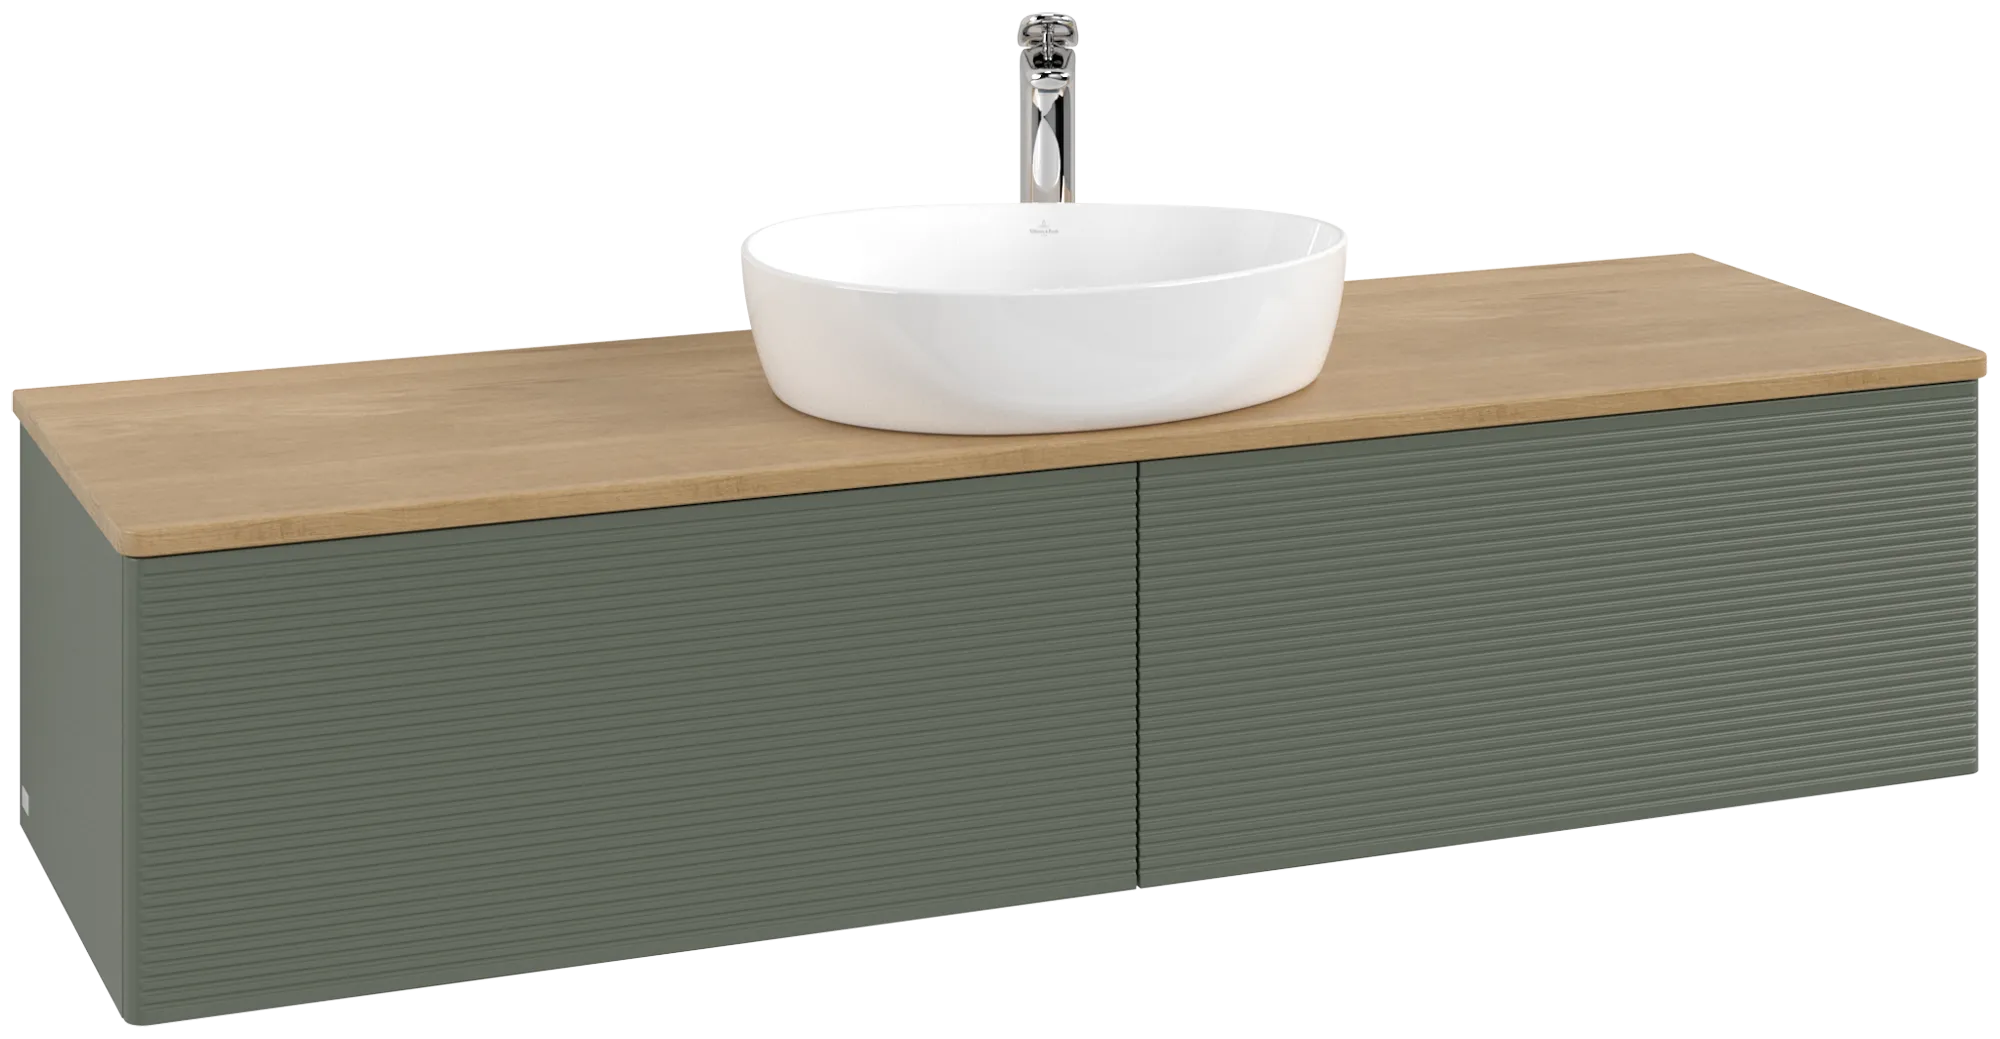 VILLEROY BOCH Antao Vanity unit, with lighting, 2 pull-out compartments, 1600 x 360 x 500 mm, Front with grain texture, Leaf Green Matt Lacquer / Honey Oak #L36151HL resmi